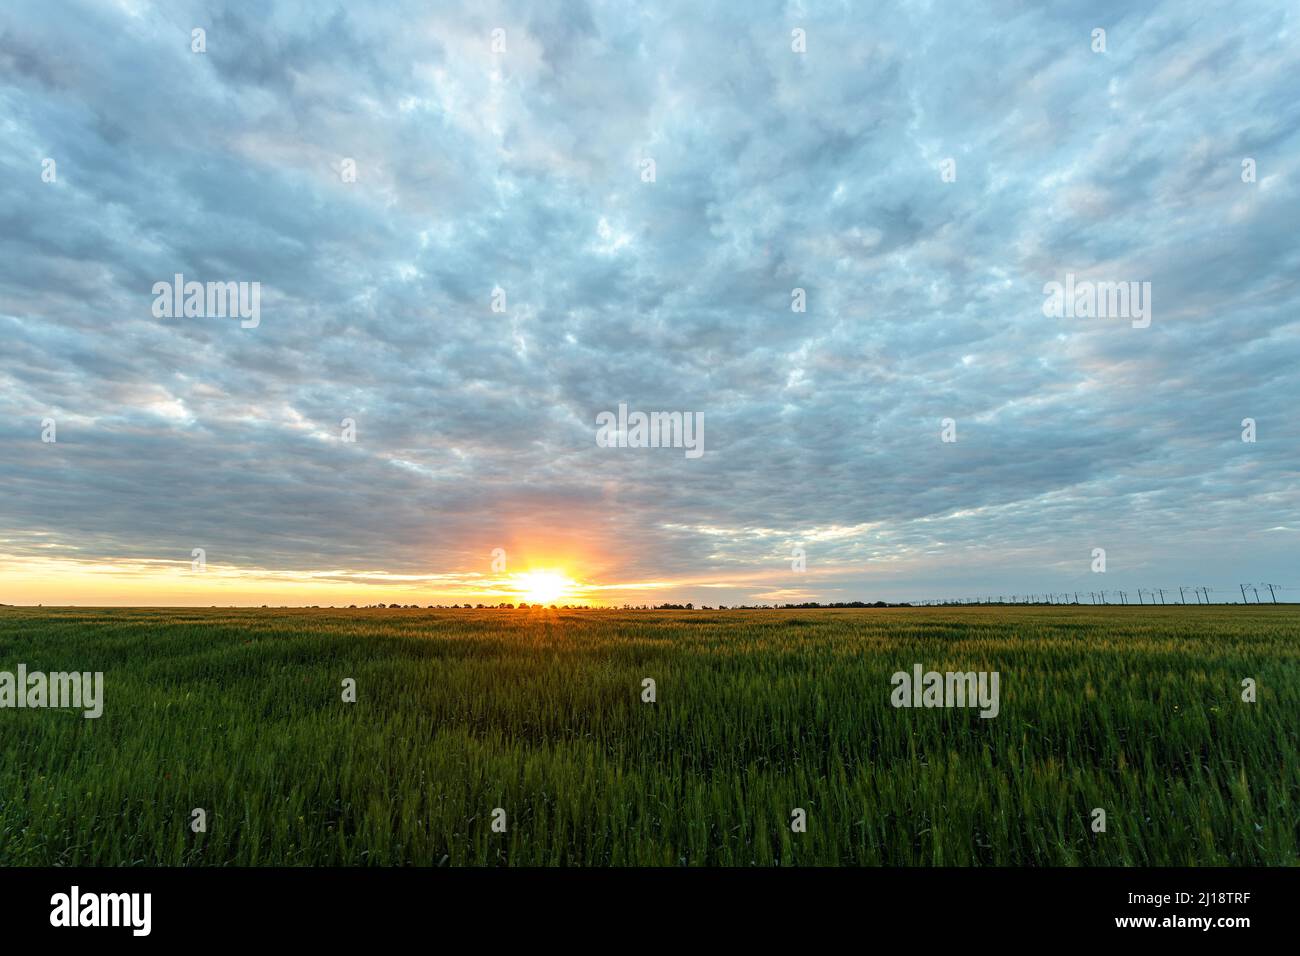 A beautiful sunset with field in the foreground Stock Photo